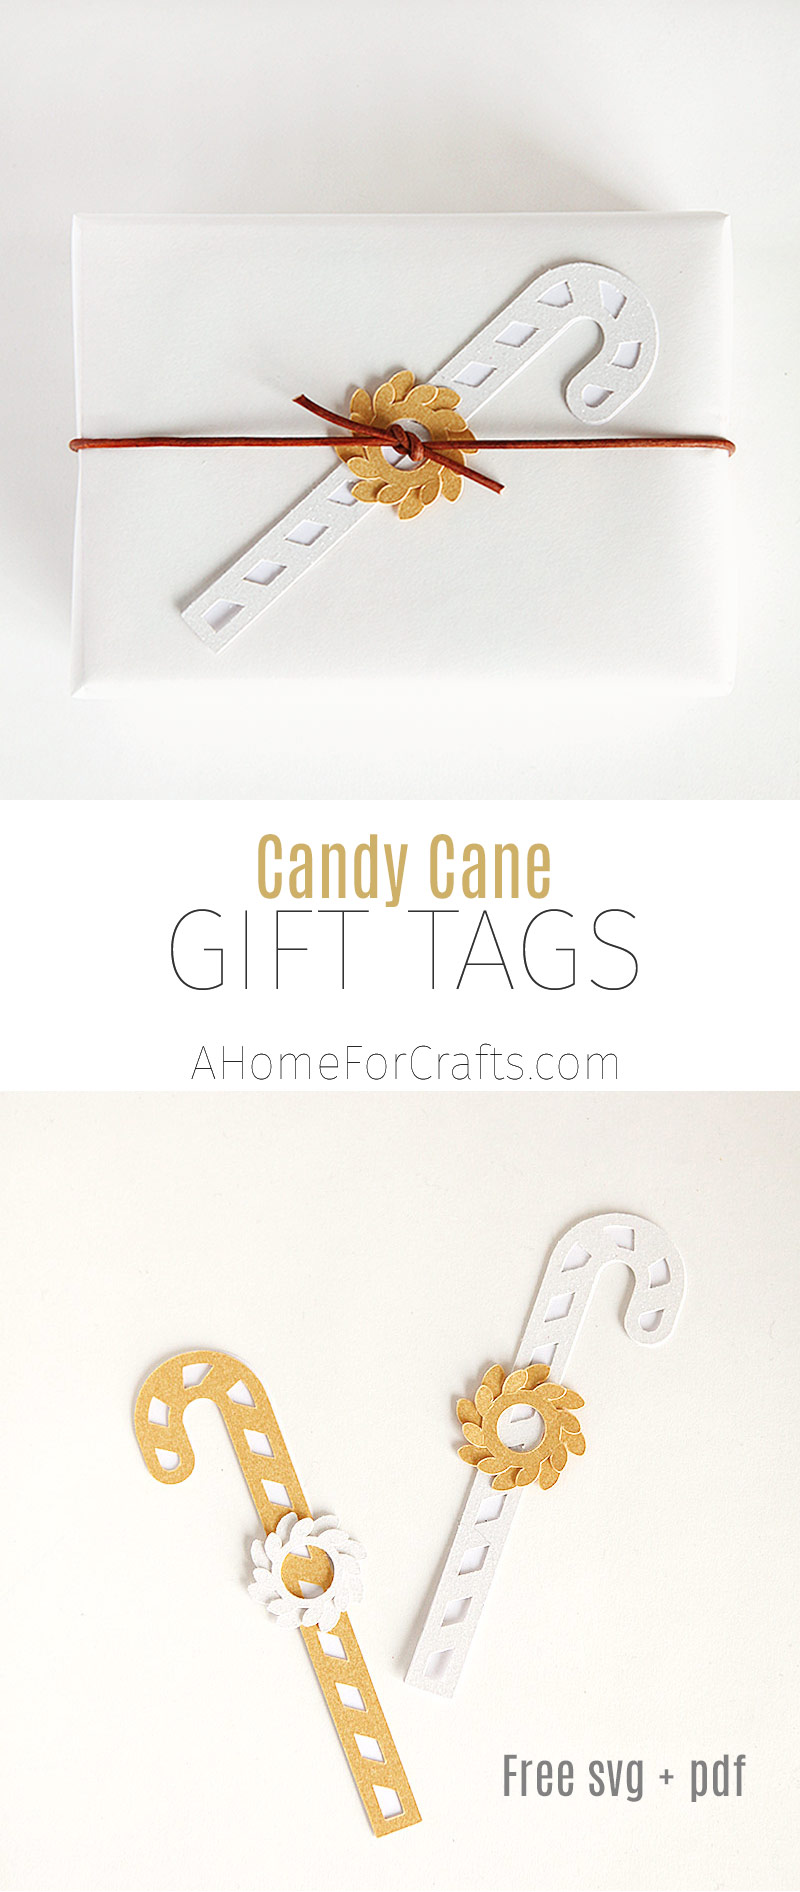 Candy cane gift tag with free svg and pdf cut files